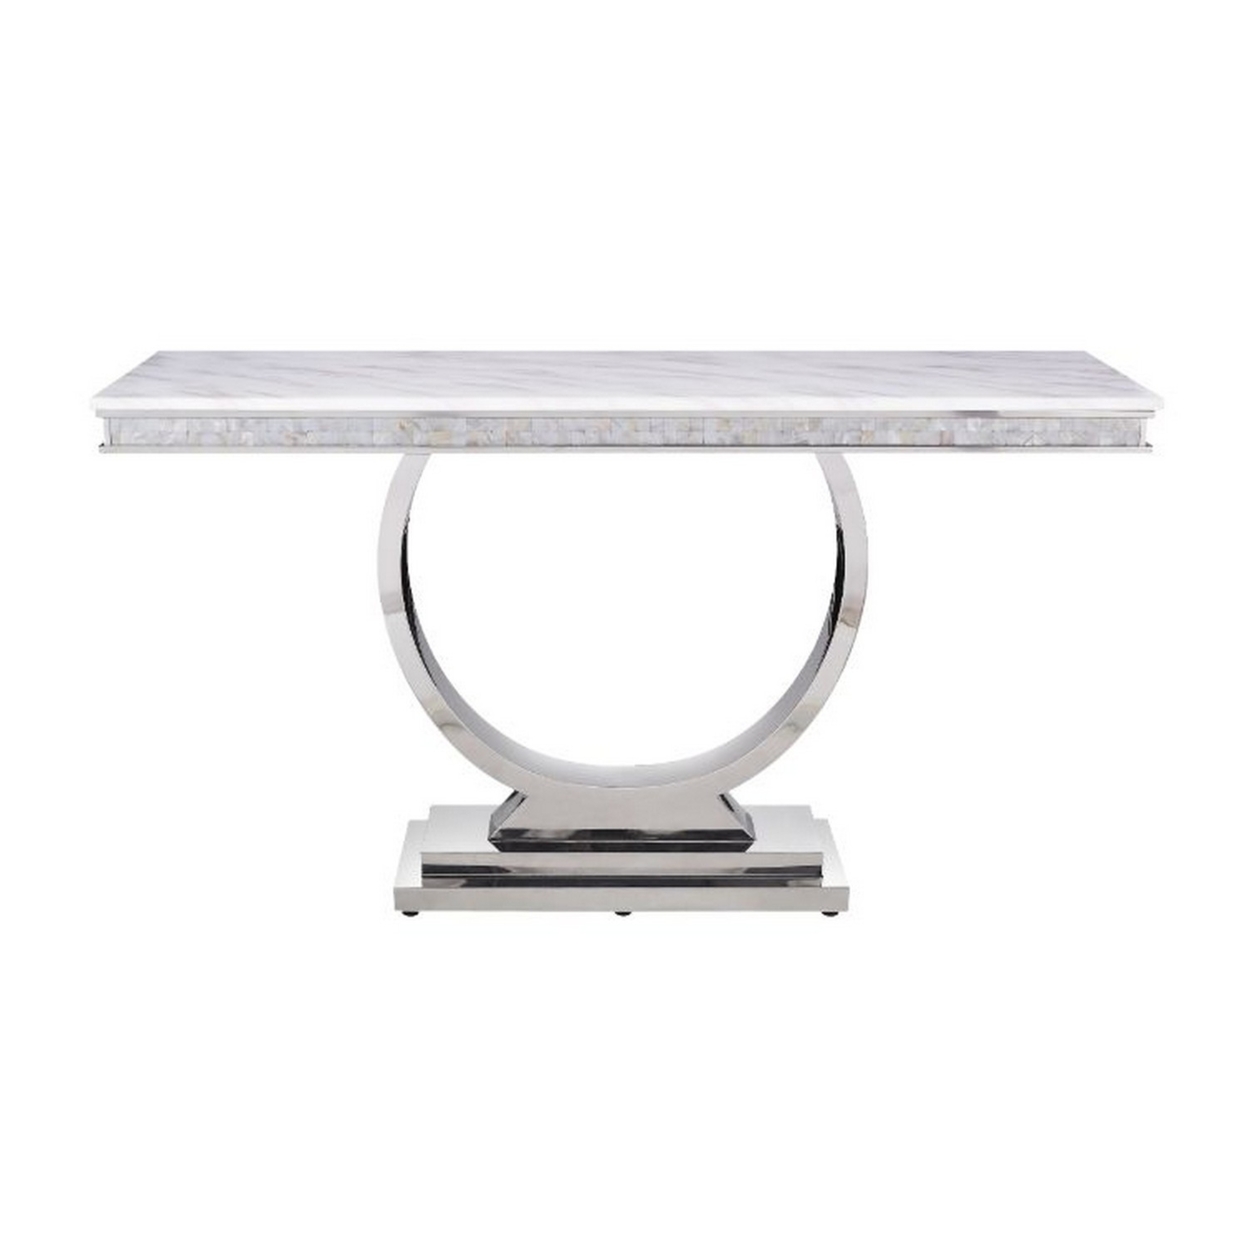 End Table With Faux Marble Top And Steel Base, White And Silver- Saltoro Sherpi